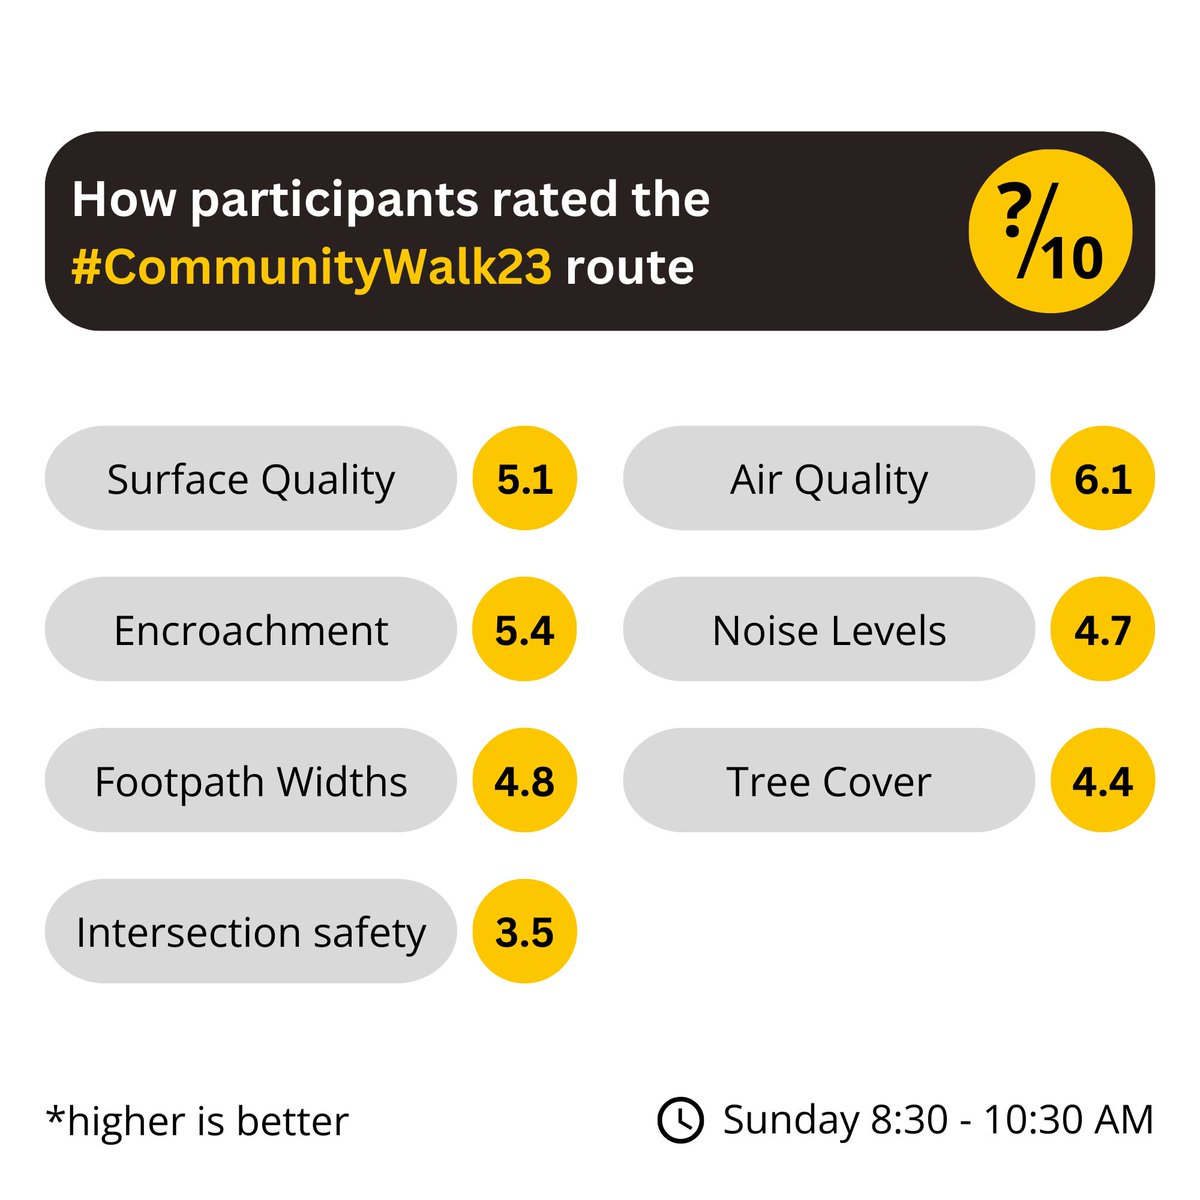 This is how participants rated the #CommunityWalk23 route in Lower Parel.
Surprisingly they rated the widths lower than expected 🤔